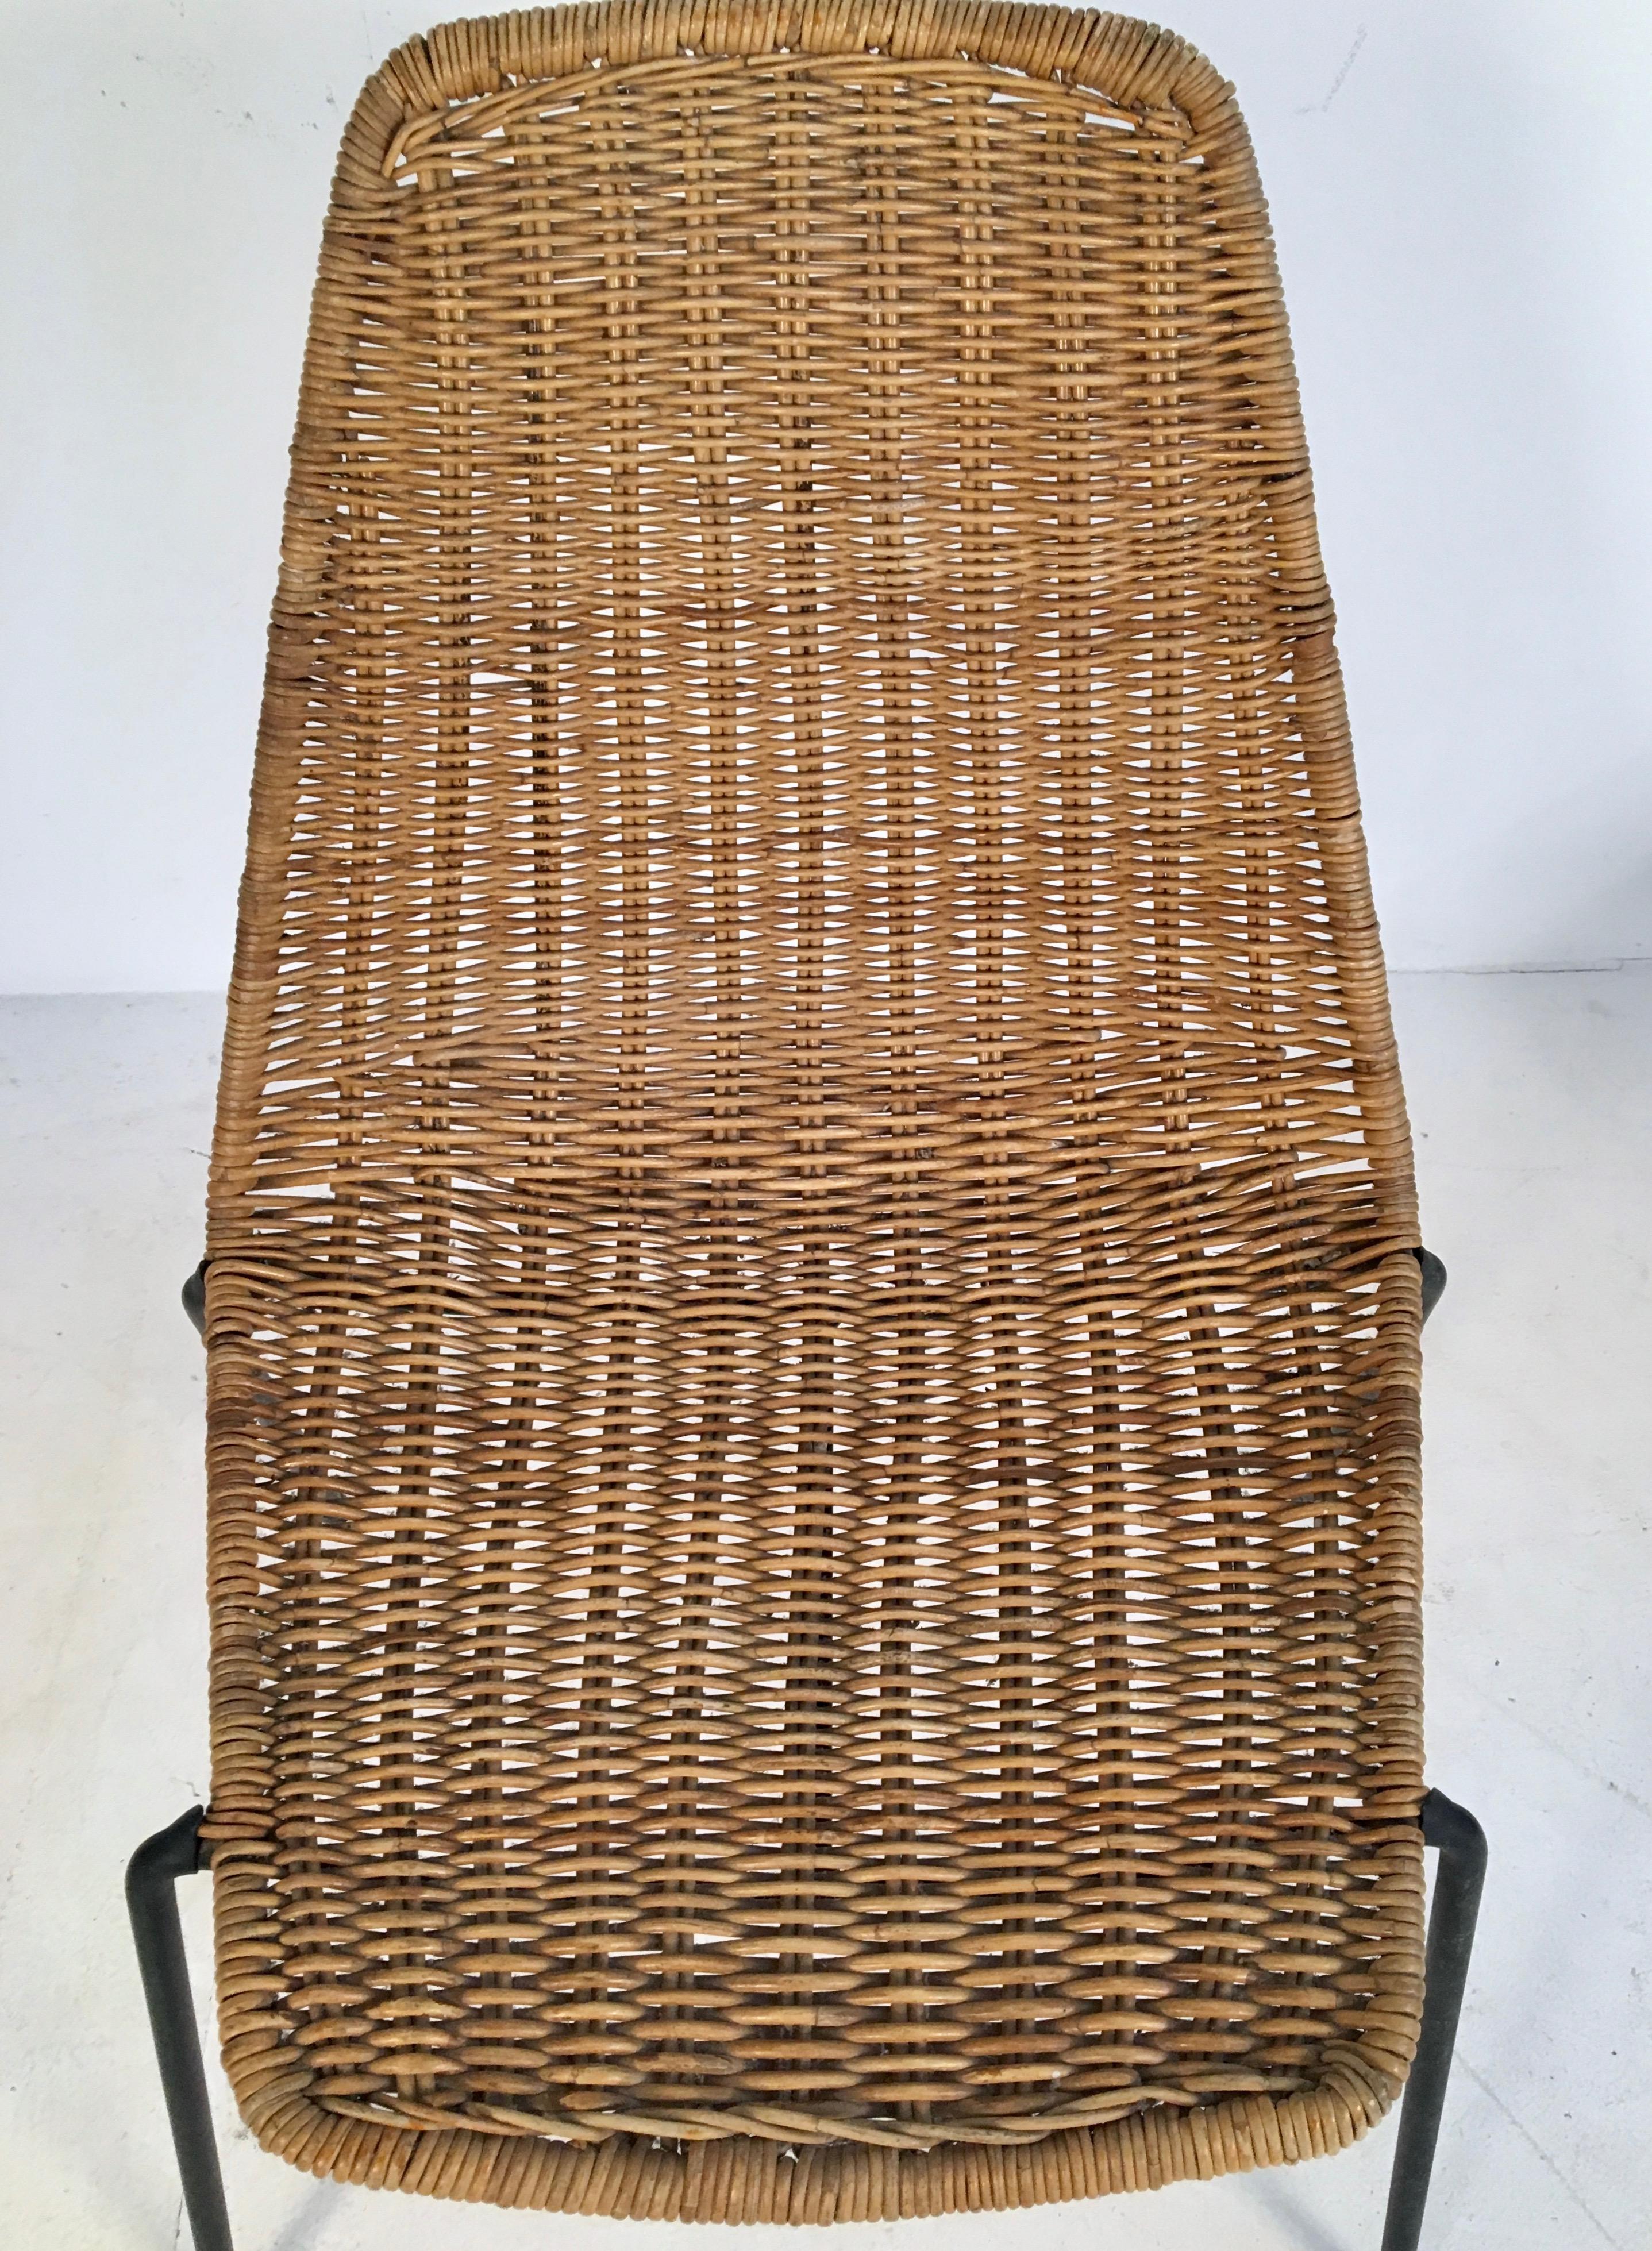 2 Midcentury Wicker Chairs by Campo & Graffi for Home Torino, Italy, circa 1950 For Sale 1